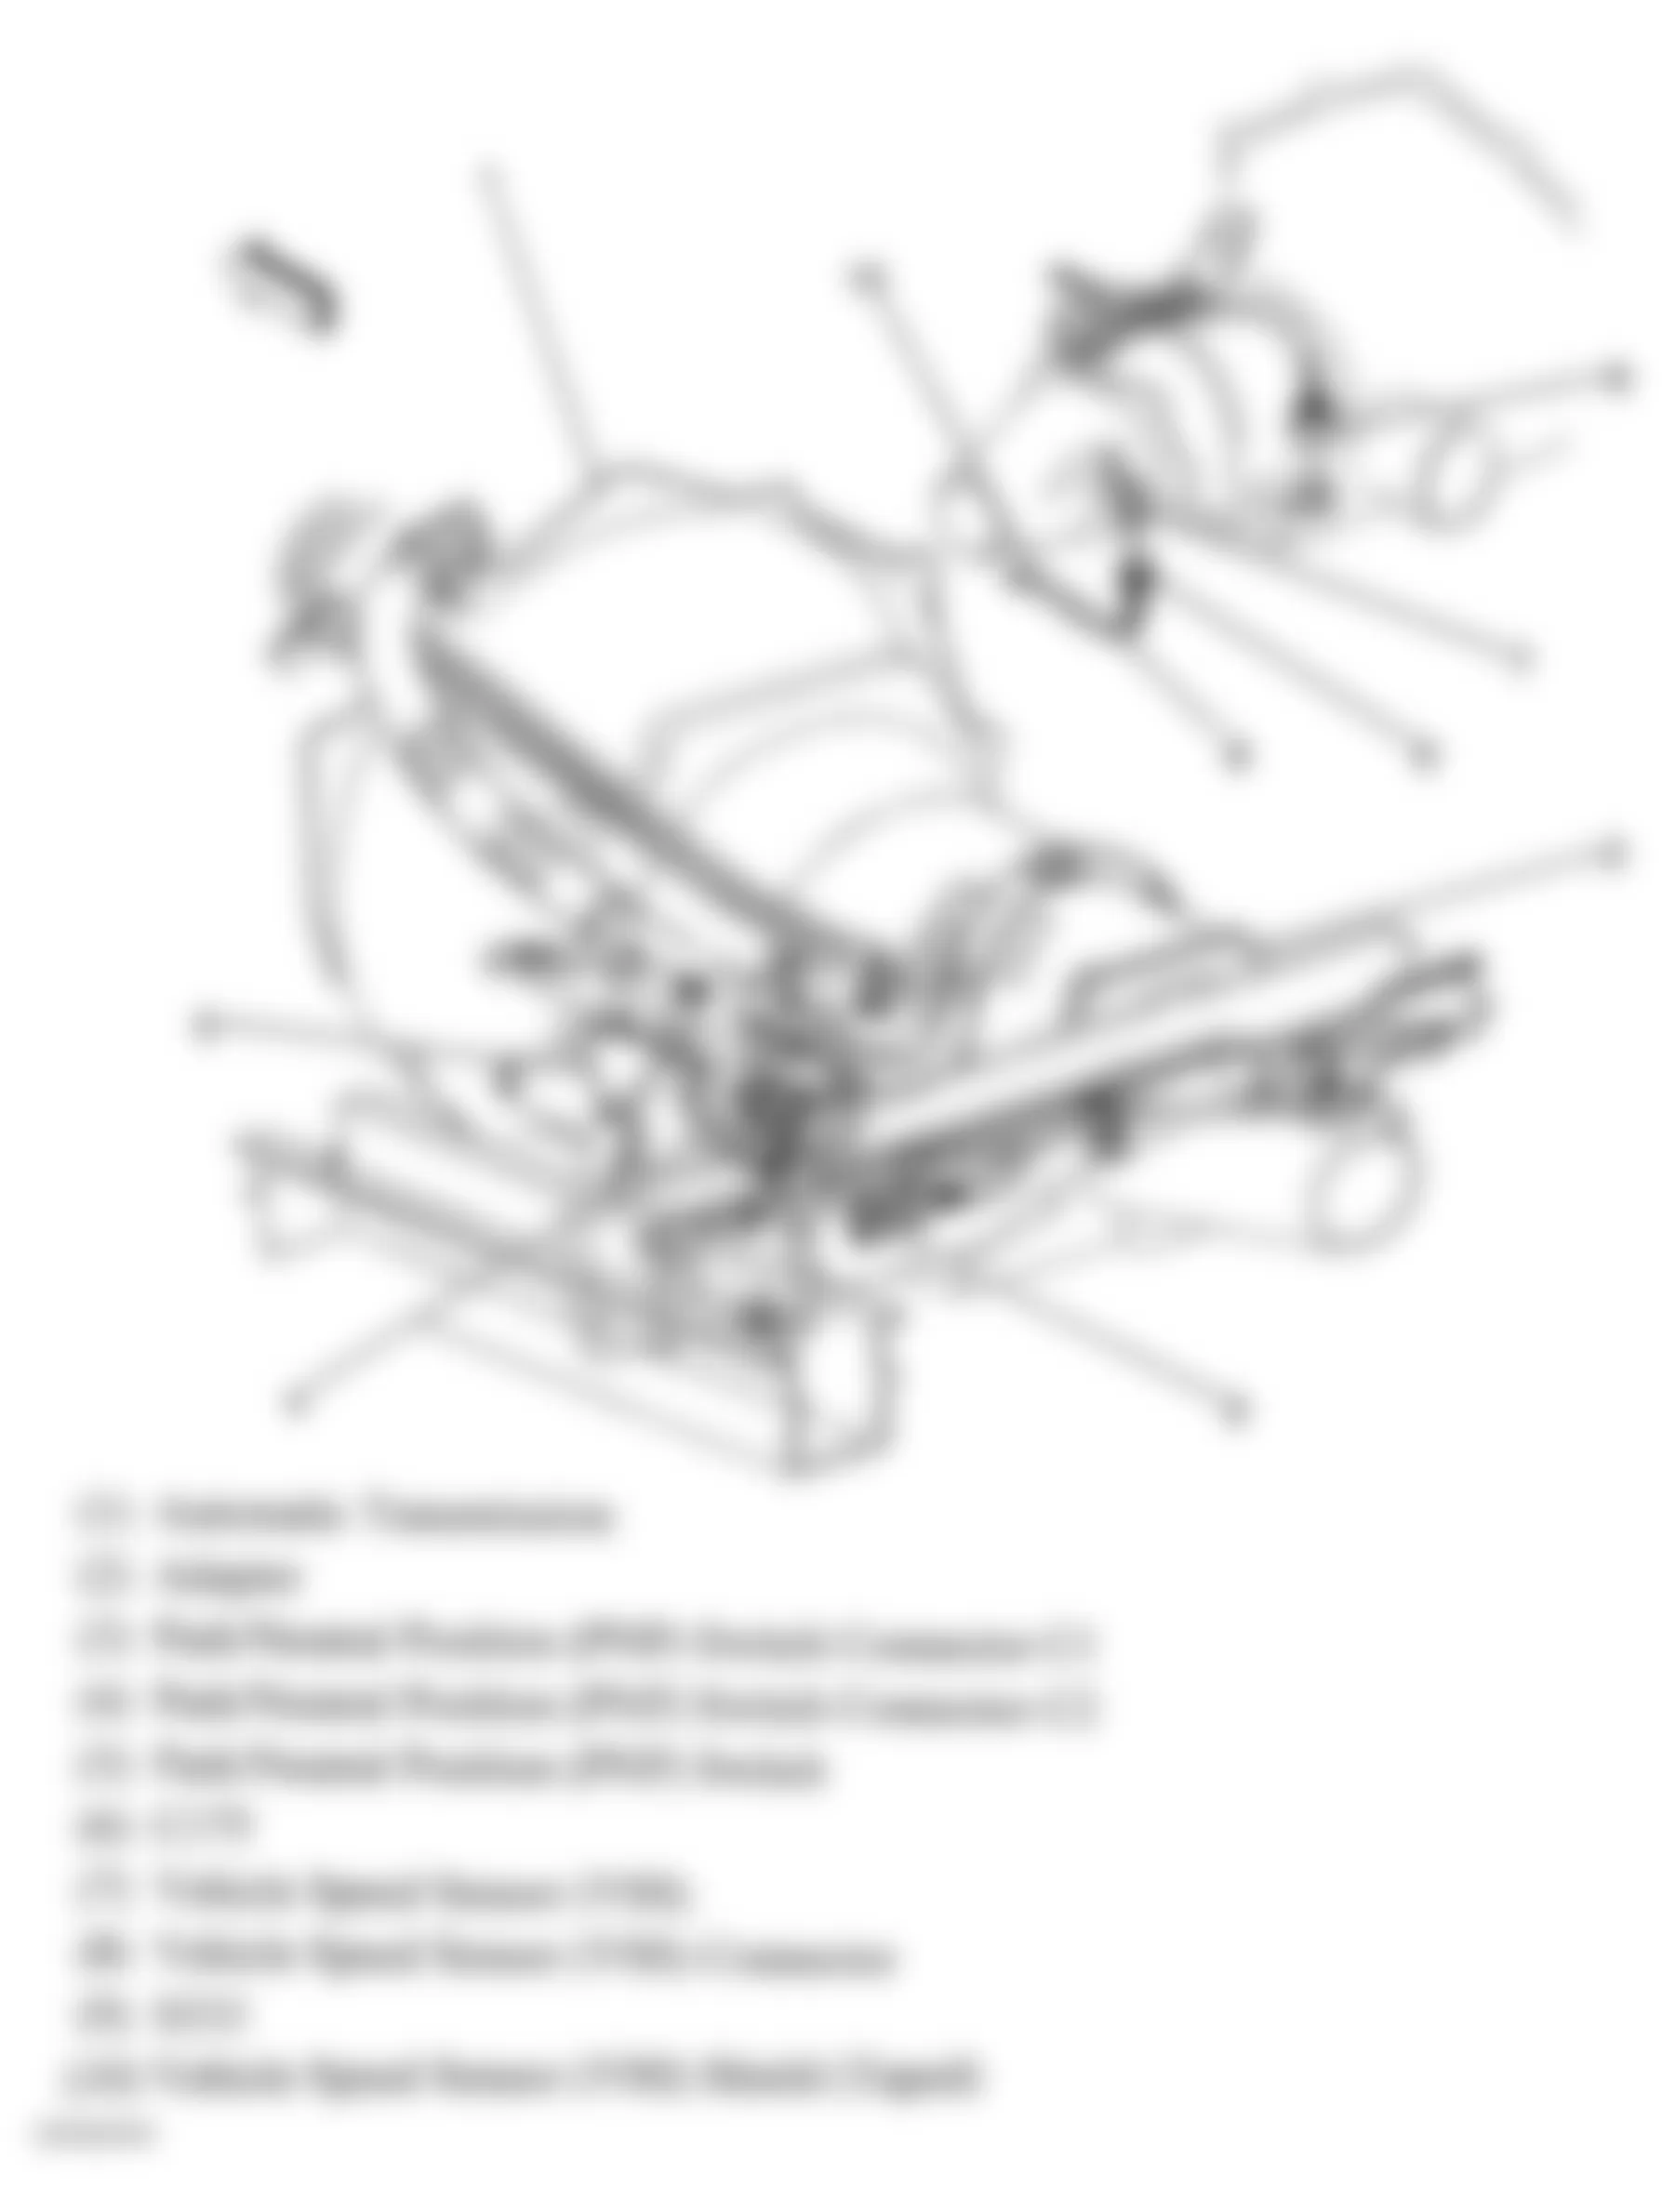 Chevrolet Astro 2005 - Component Locations -  Transmission